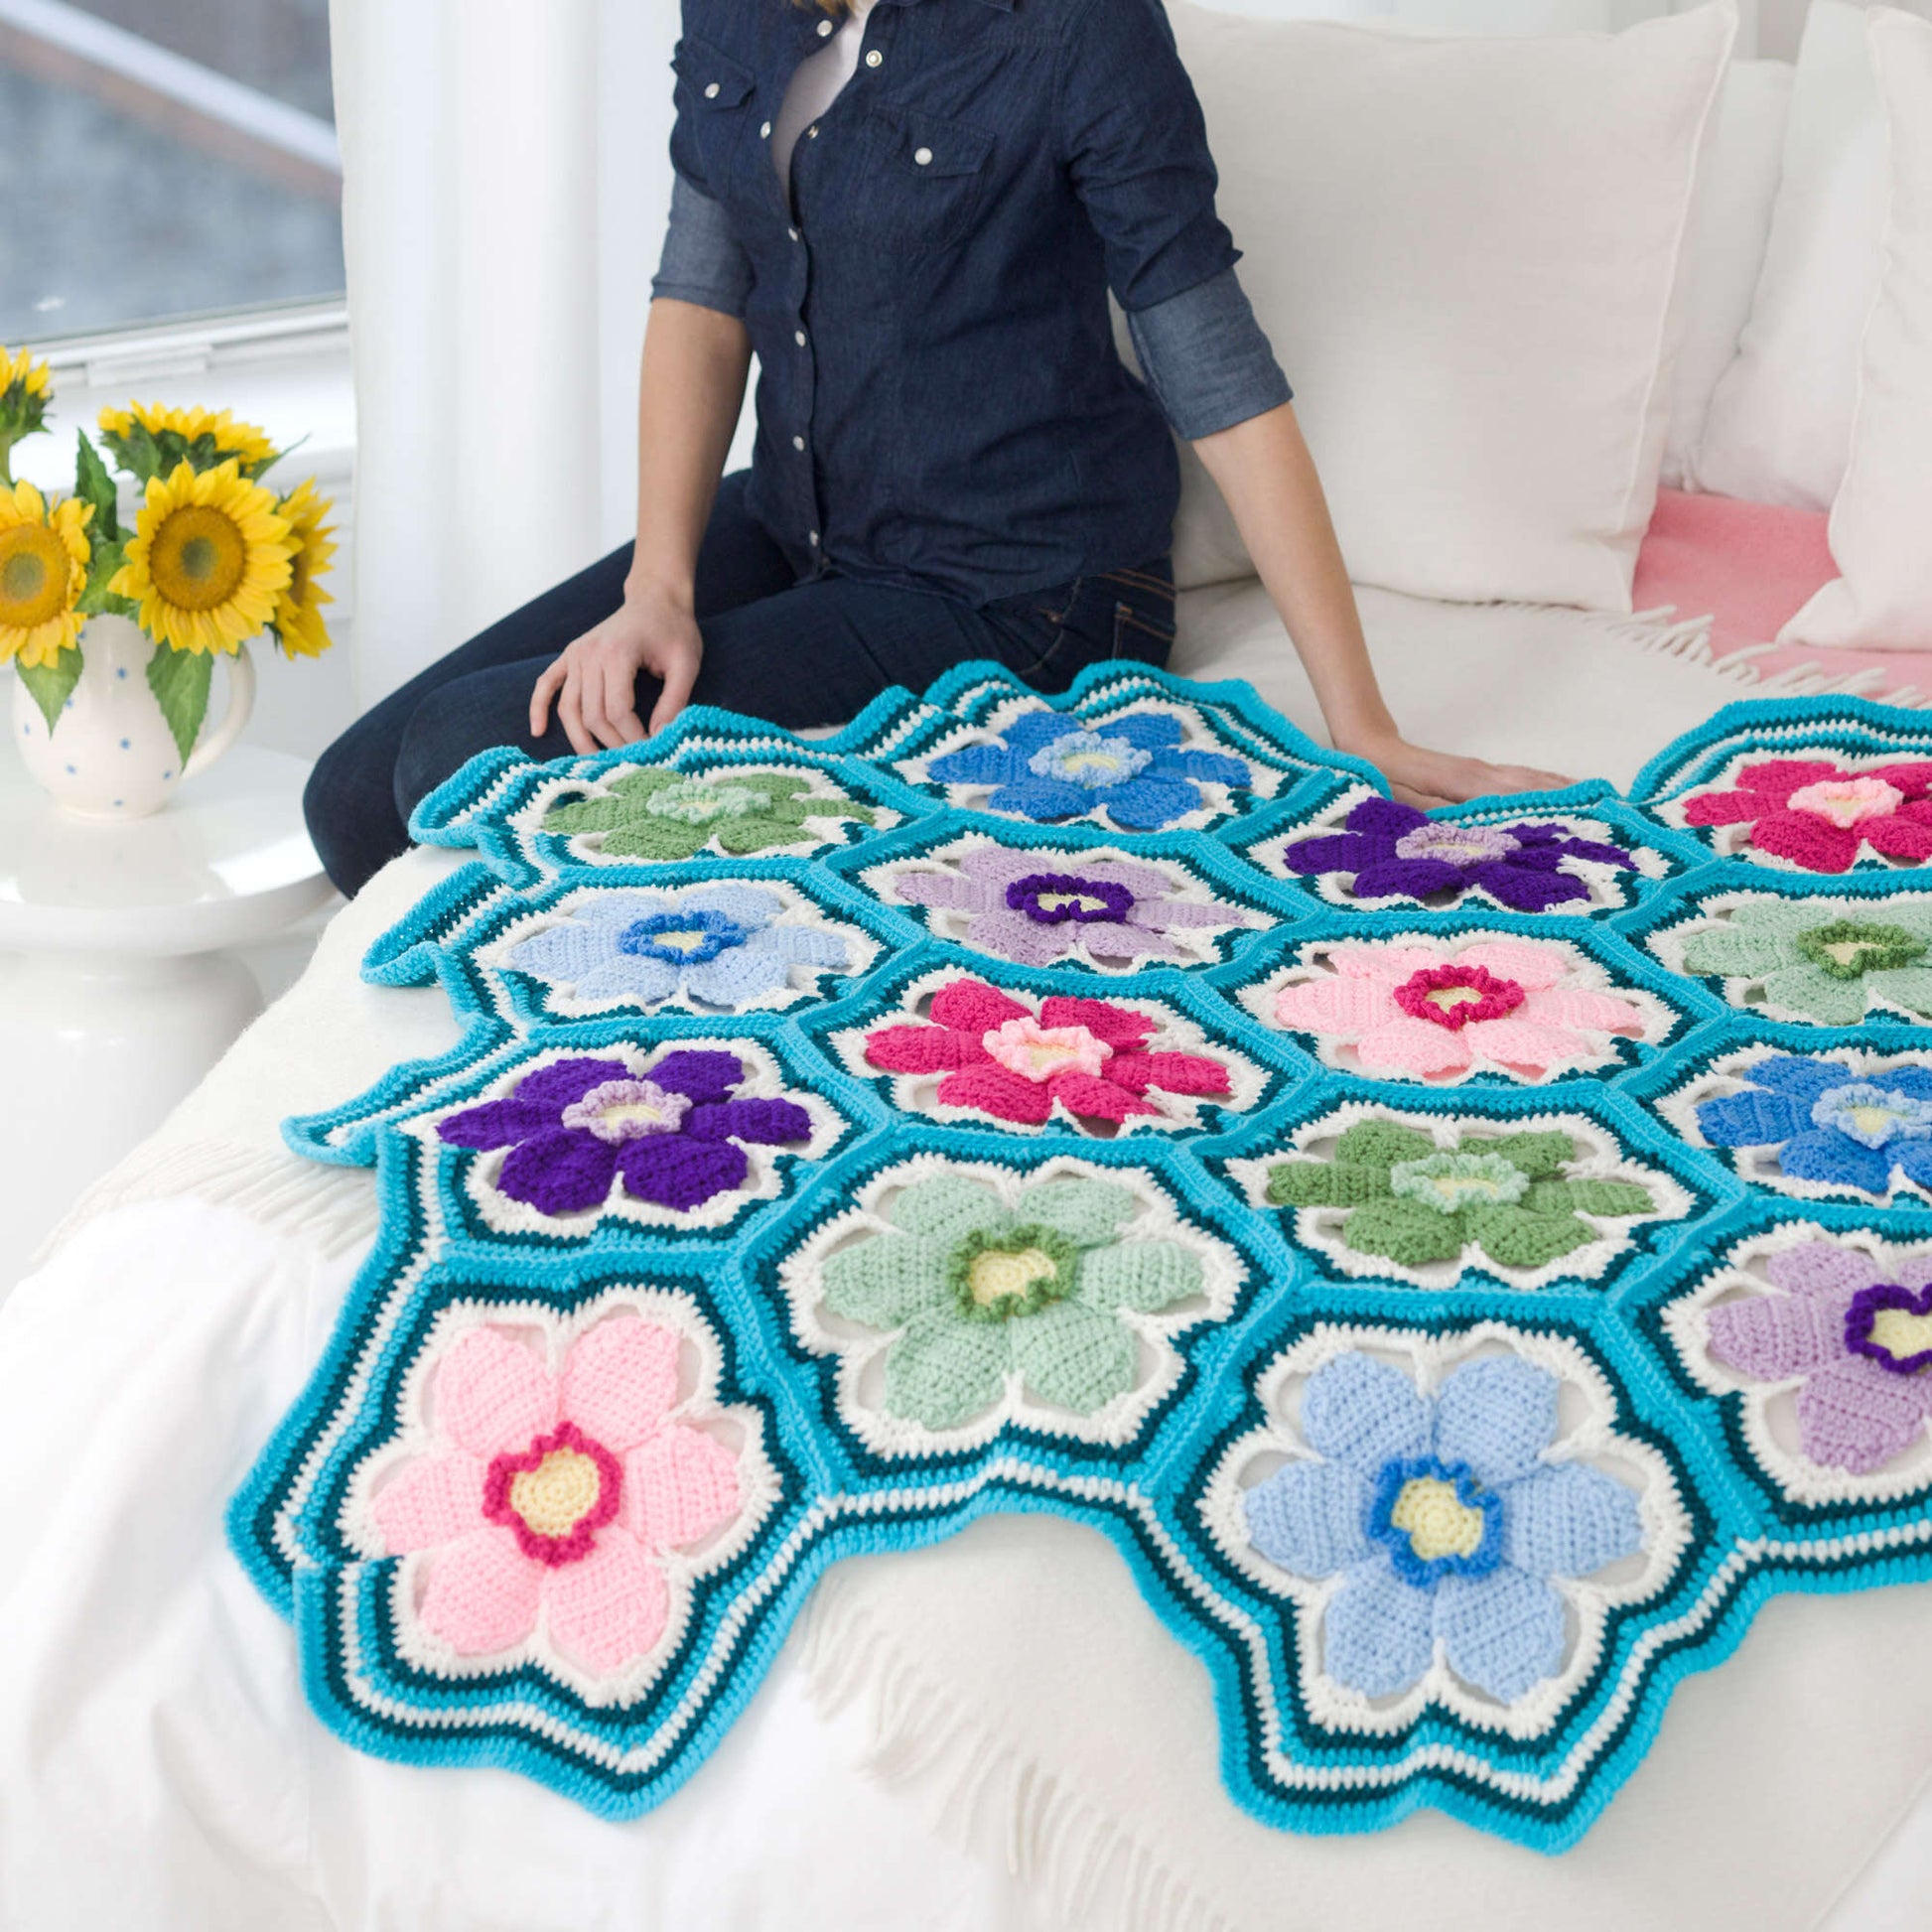 Free Red Heart Crochet Posey Throw Pattern